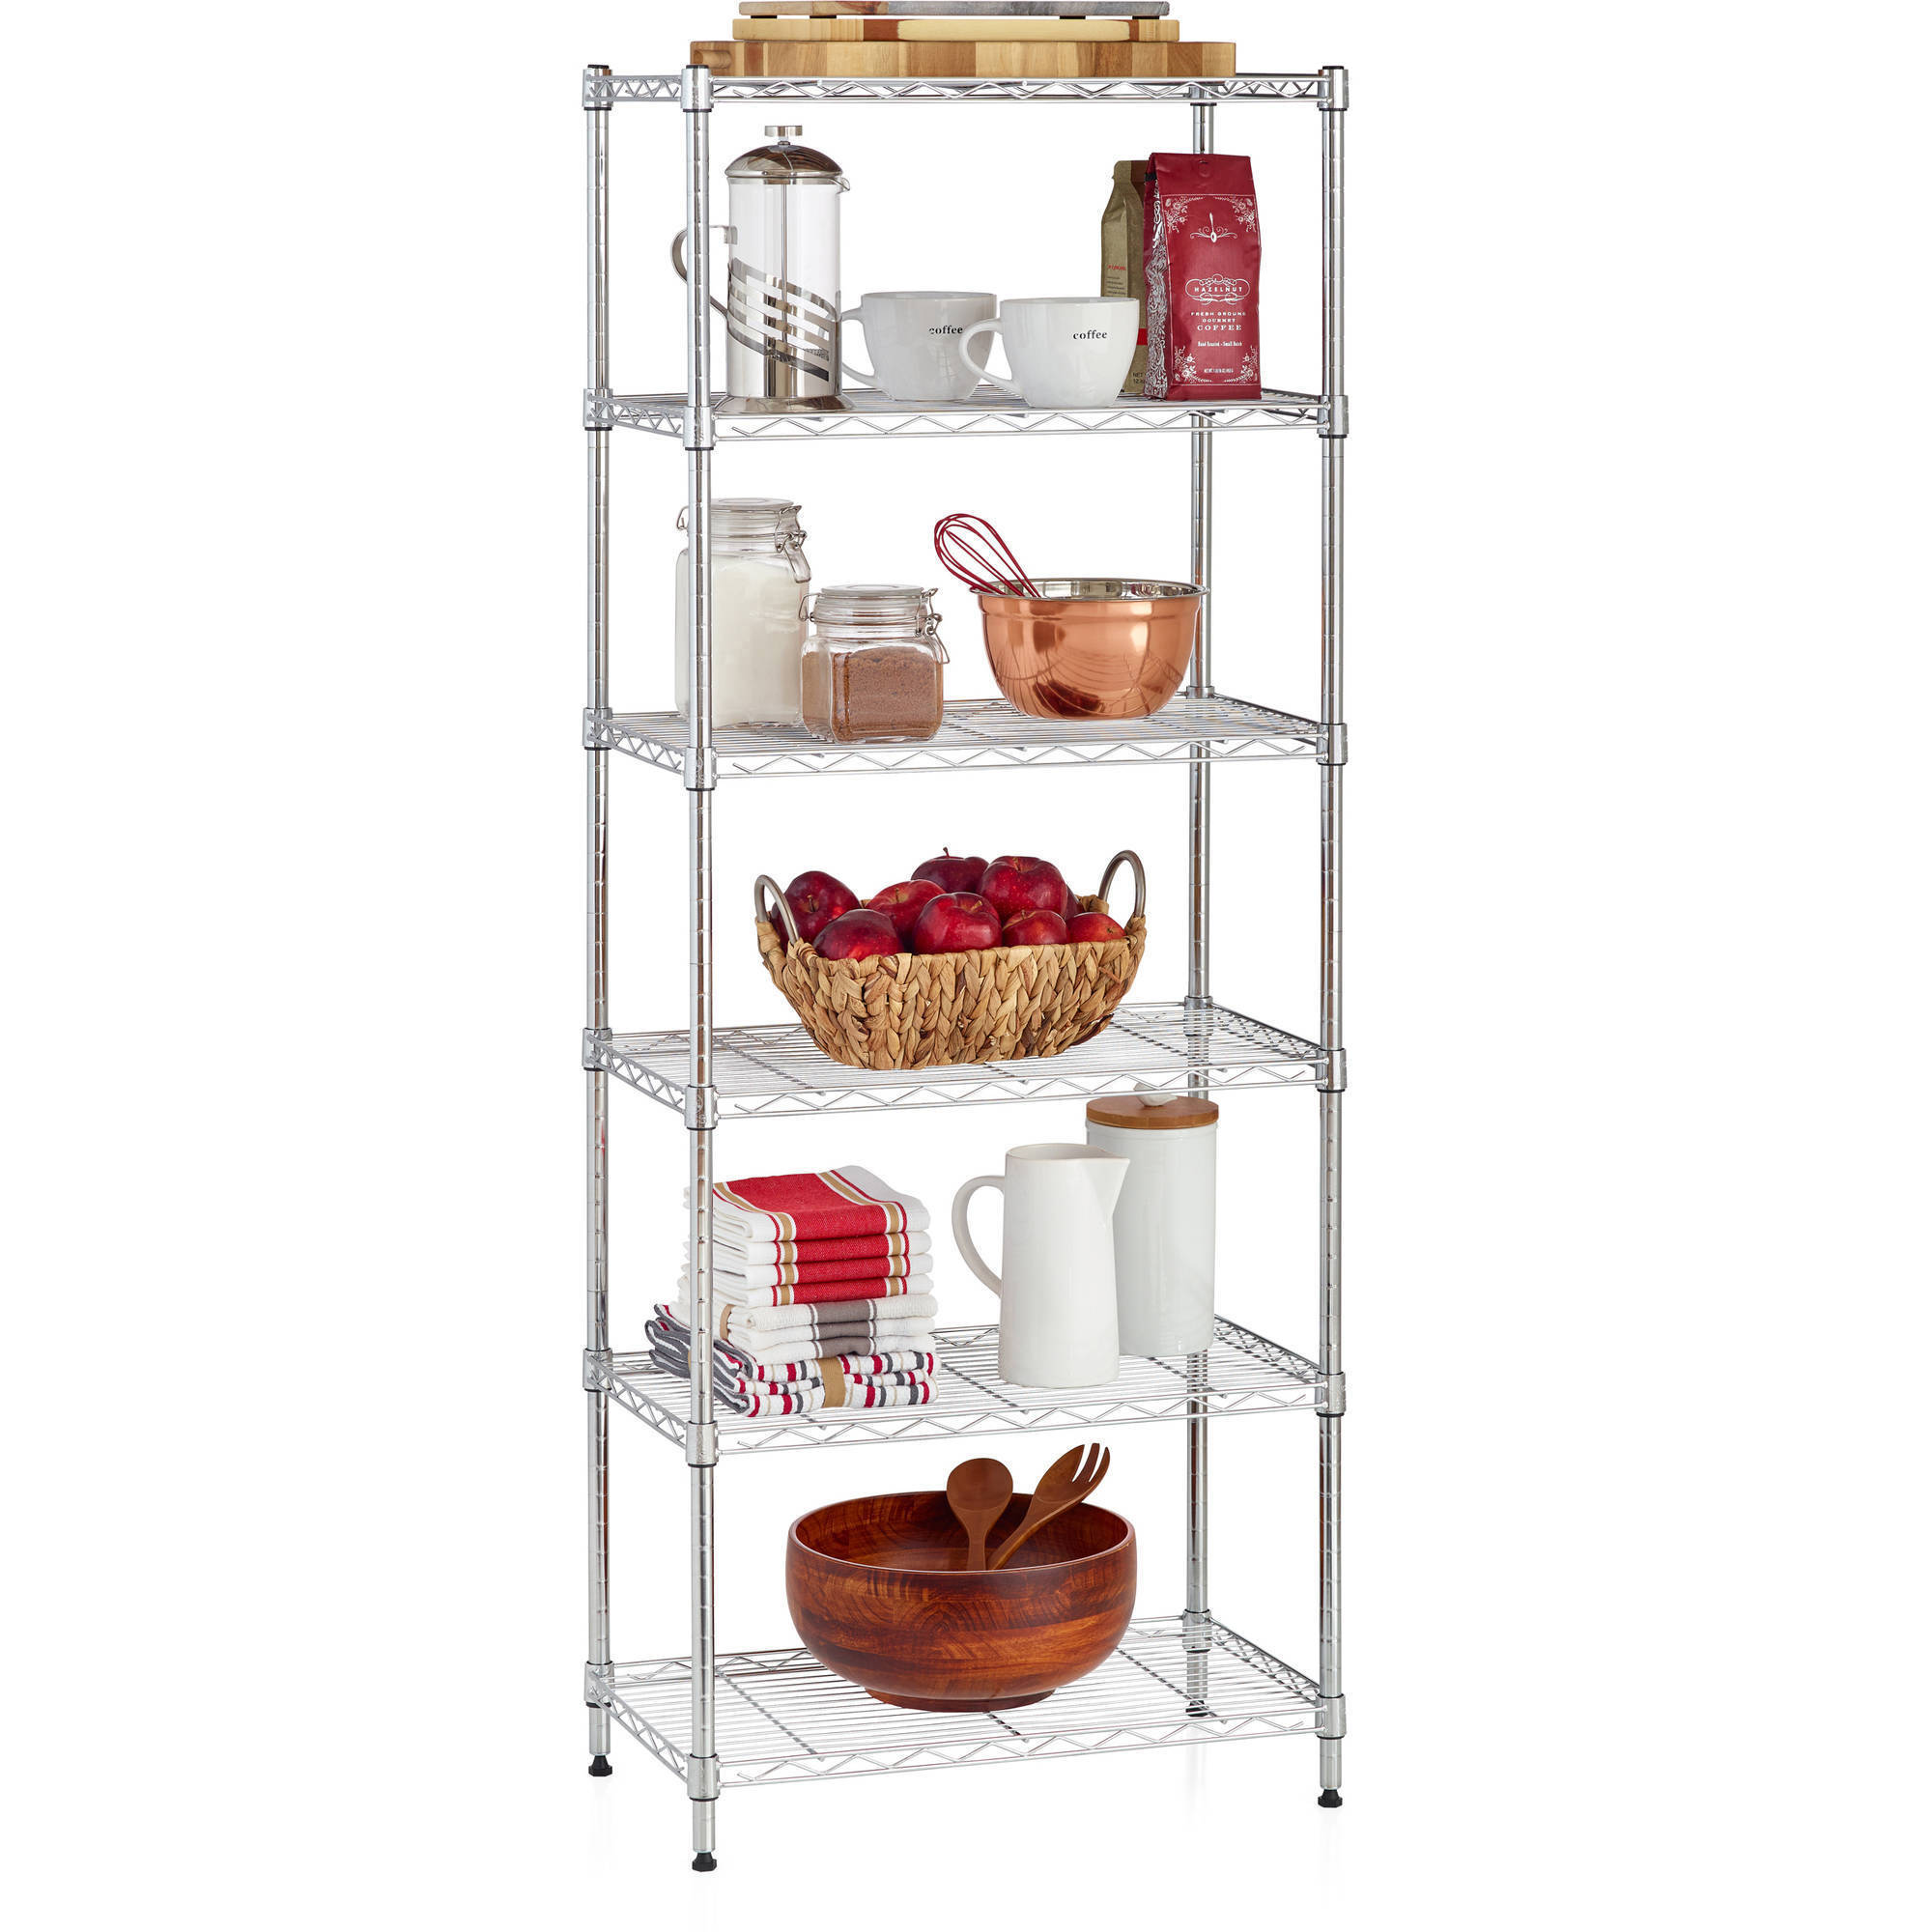 Work Choice 6-shelf Commercial Wire Shelving Convertible Rack, 13"Dx23"Wx59"H - image 1 of 4